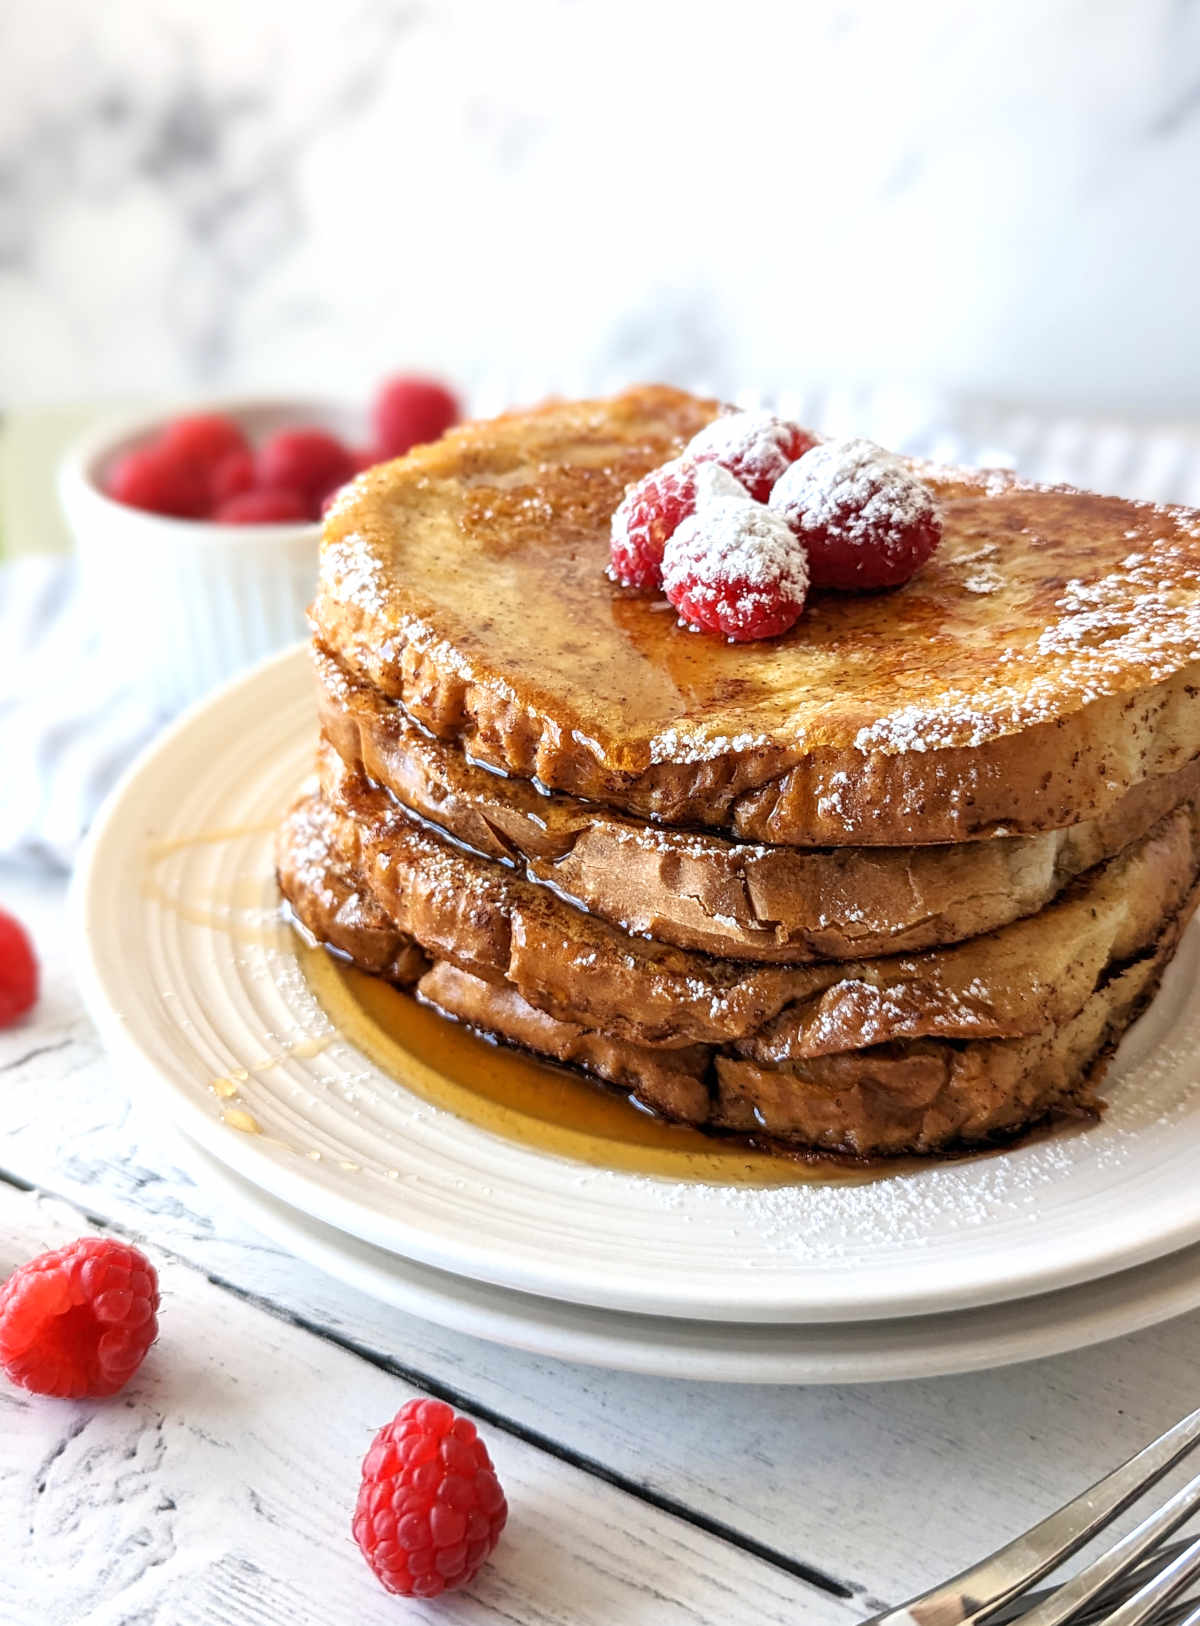 Just Egg French Toast slices stacked on a plate, topped with raspberries, maple syrup and powdered sugar.